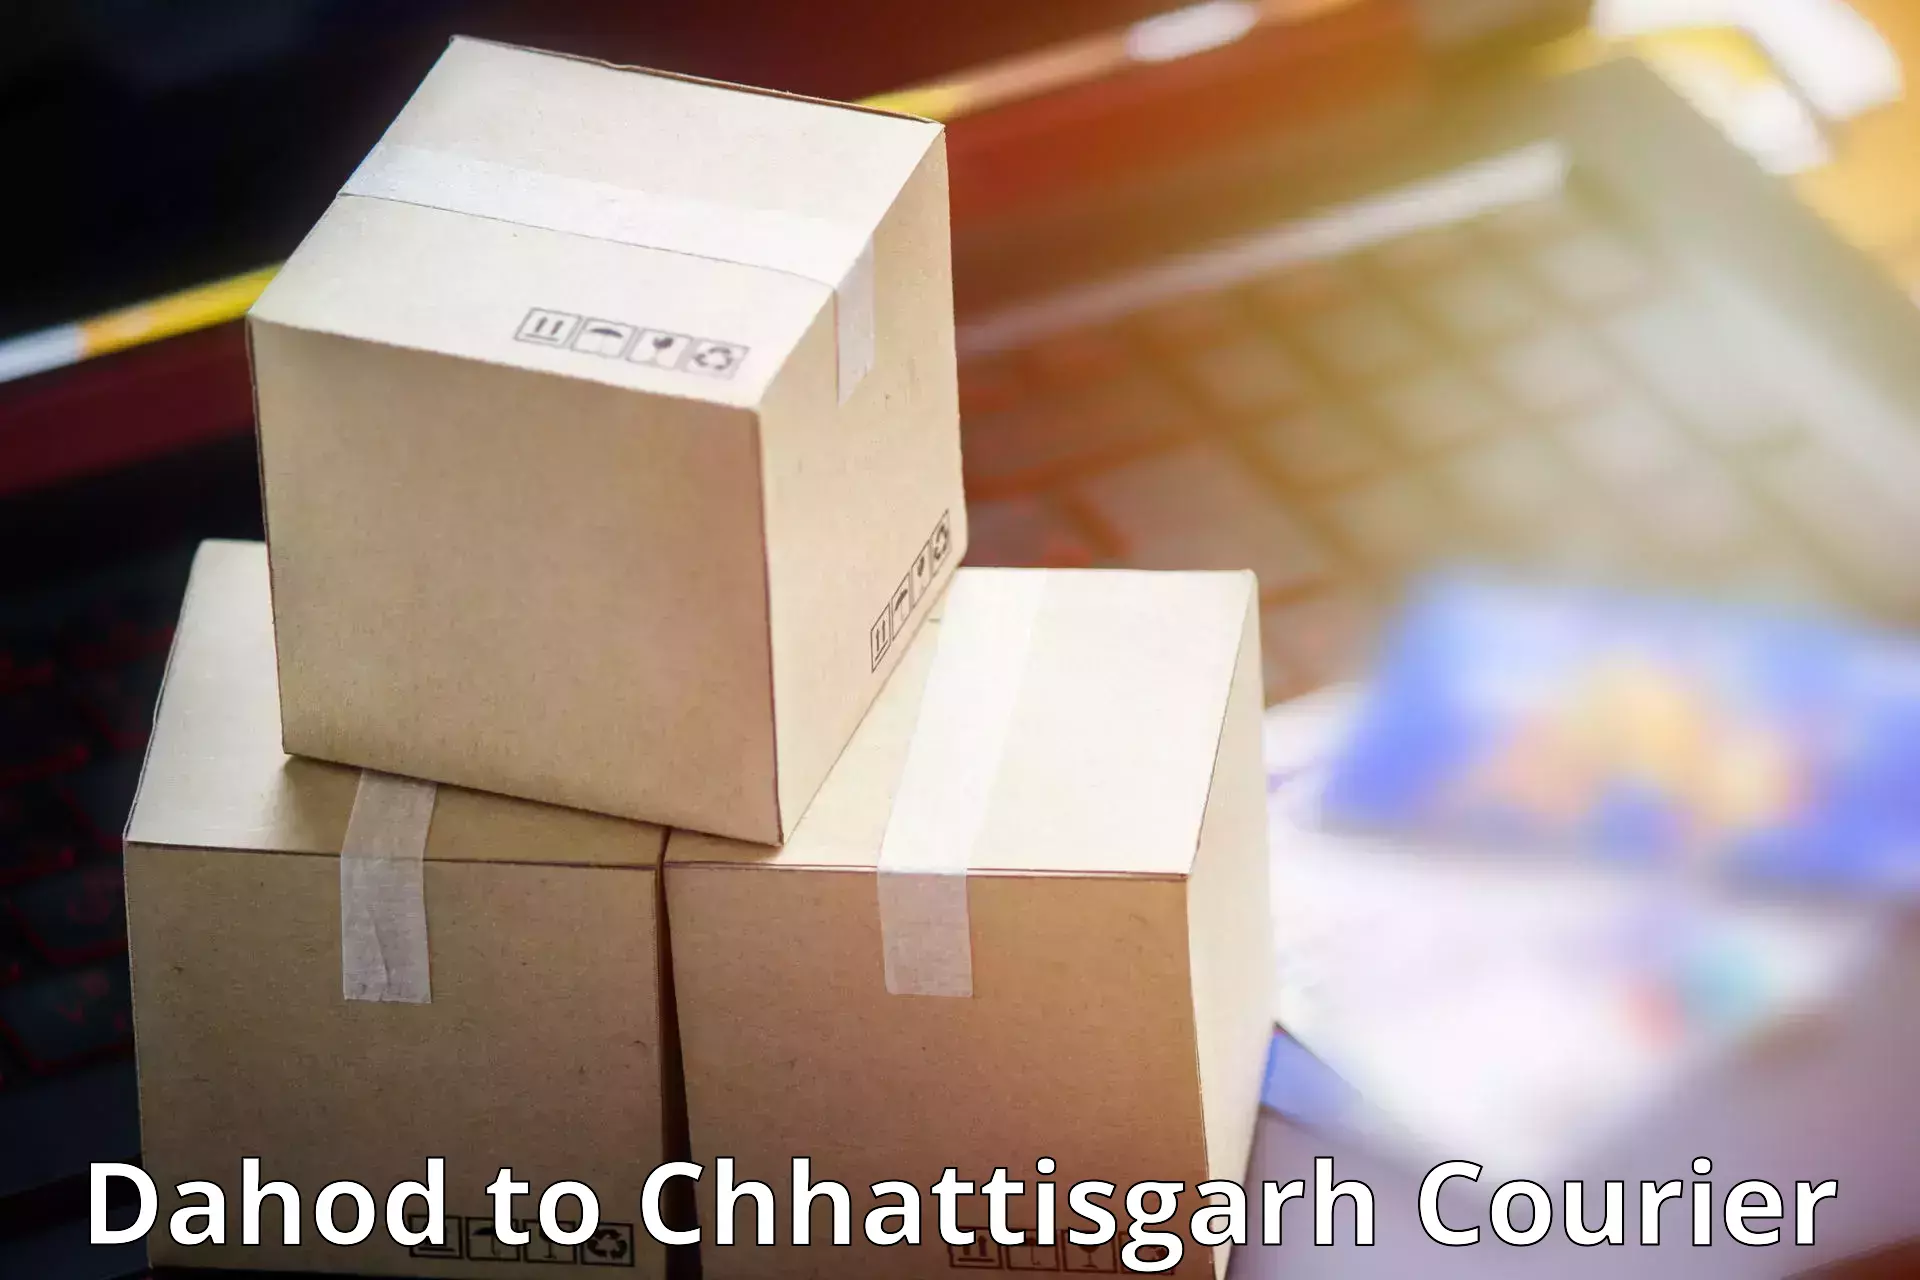 Custom courier packaging Dahod to bagbahra